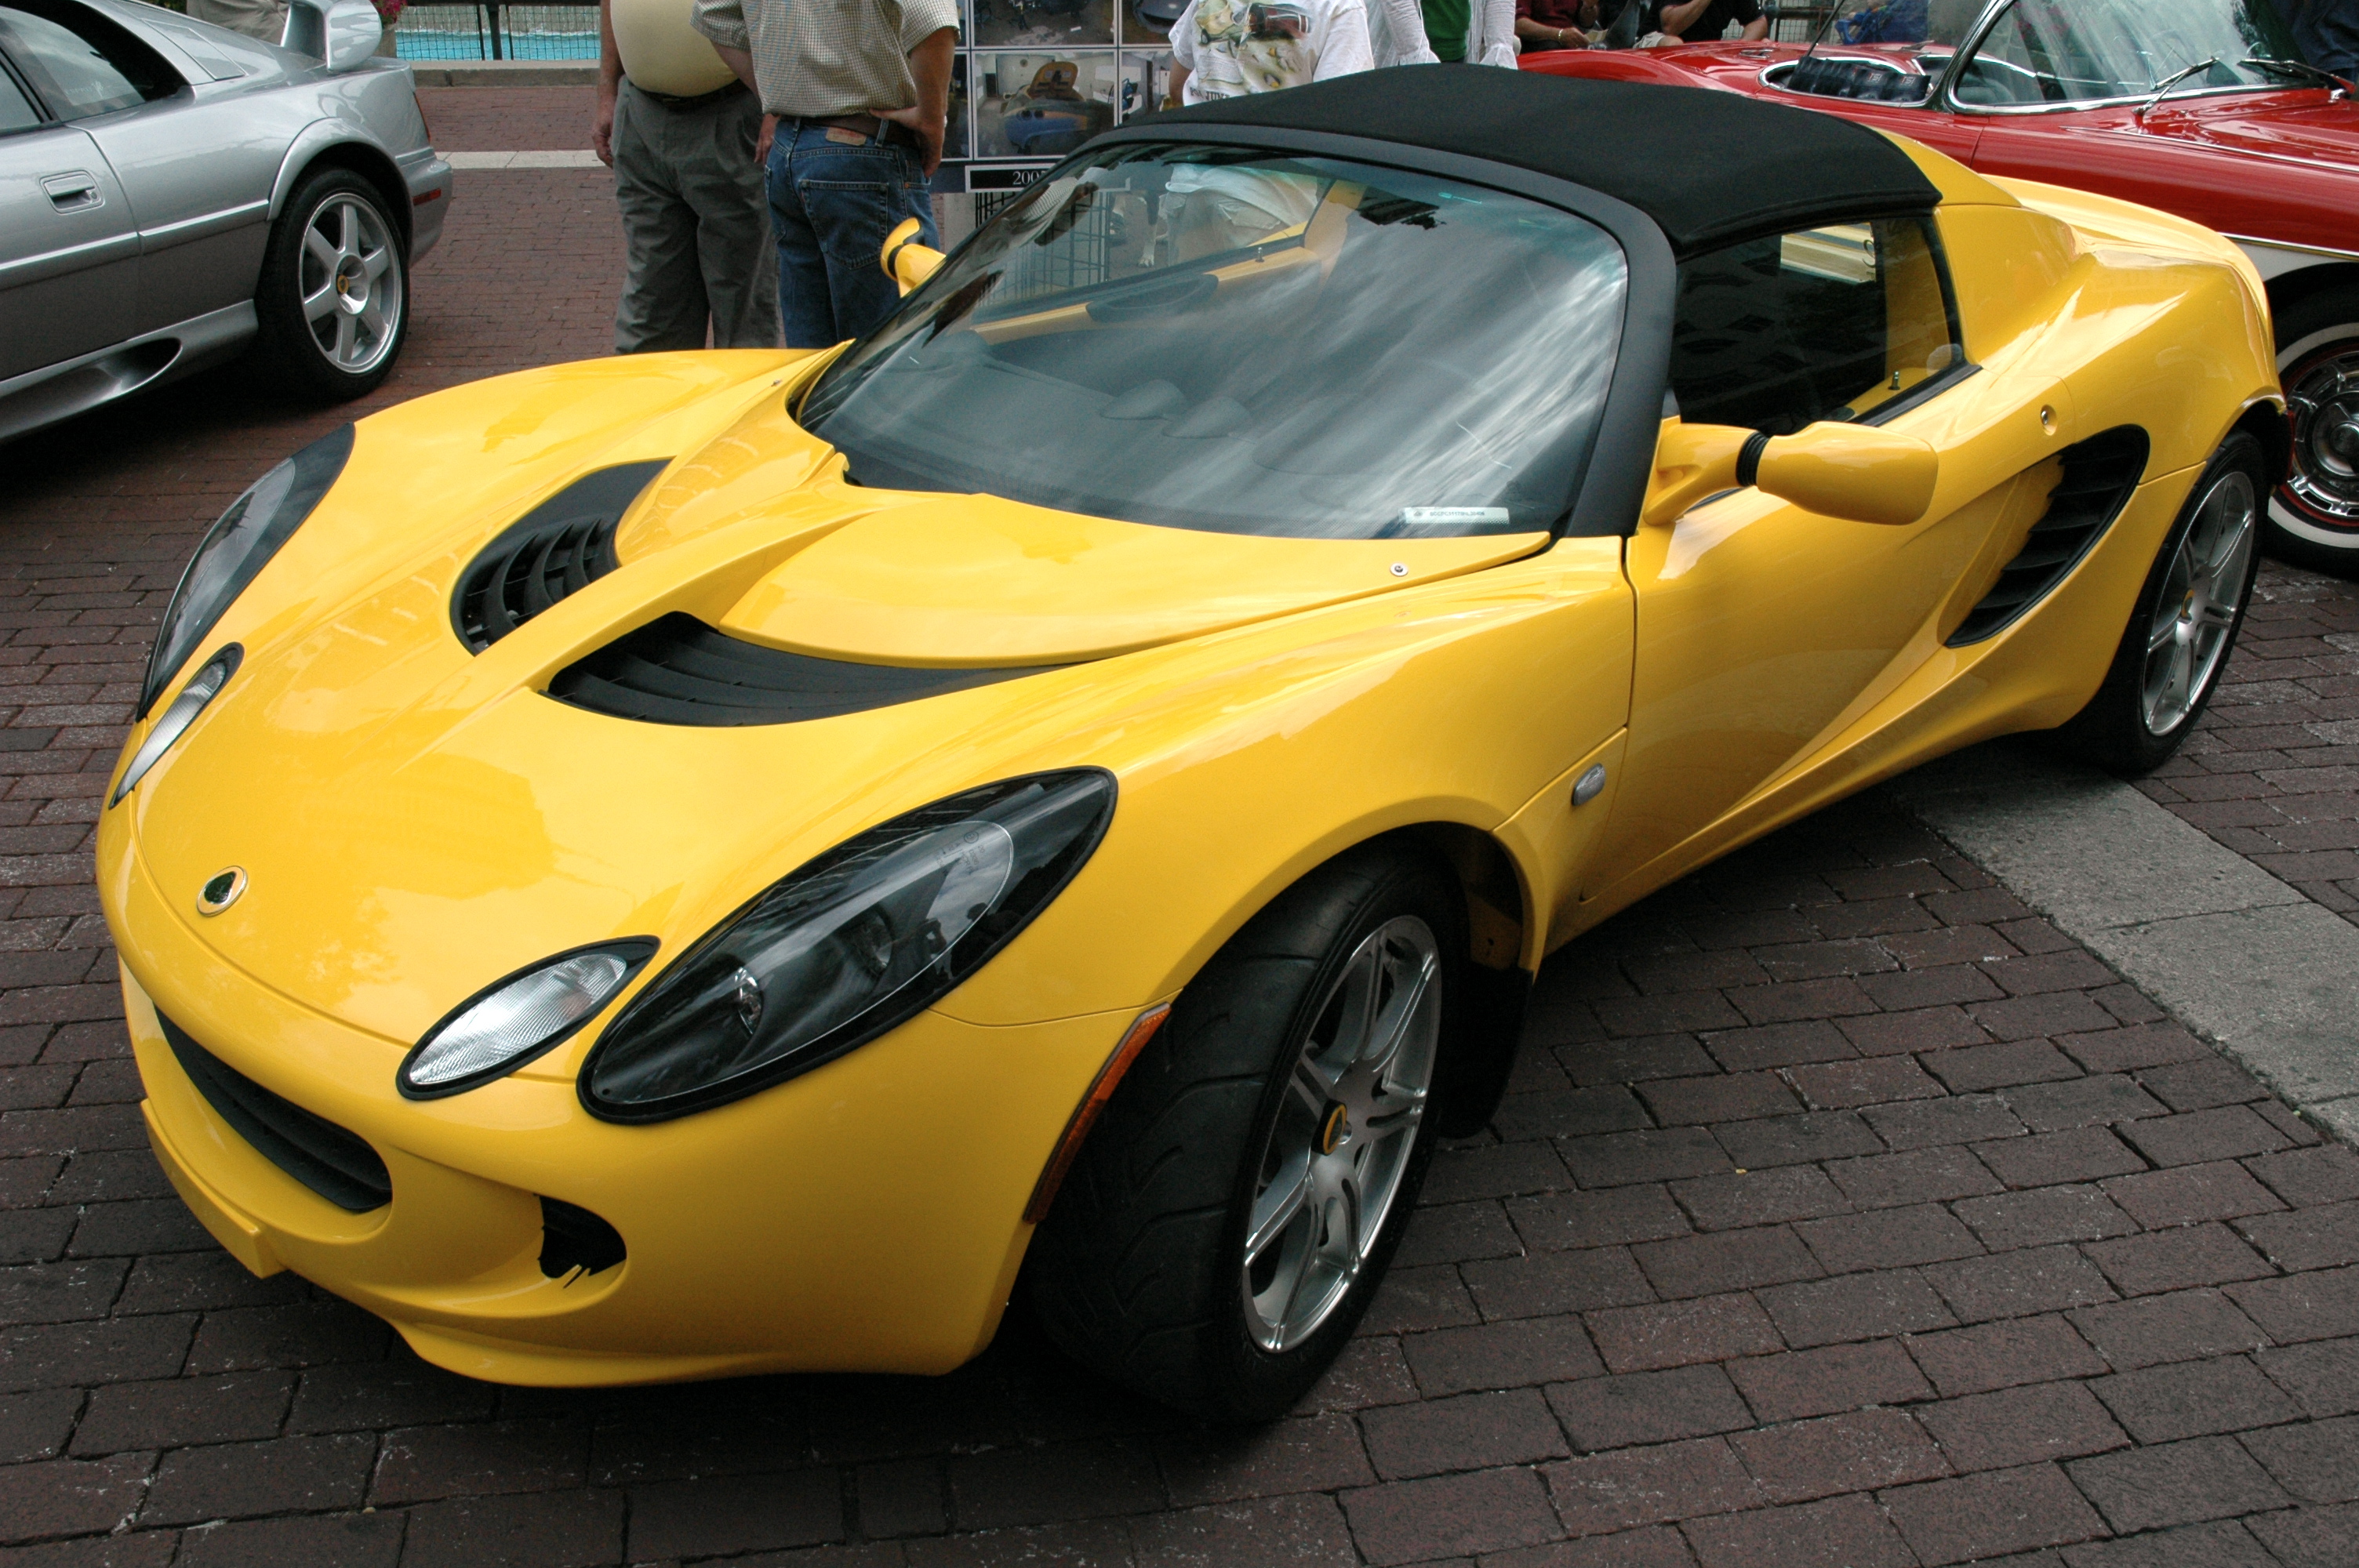 File:Lotus Elise at Indy Concours.jpg - Wikimedia Commons